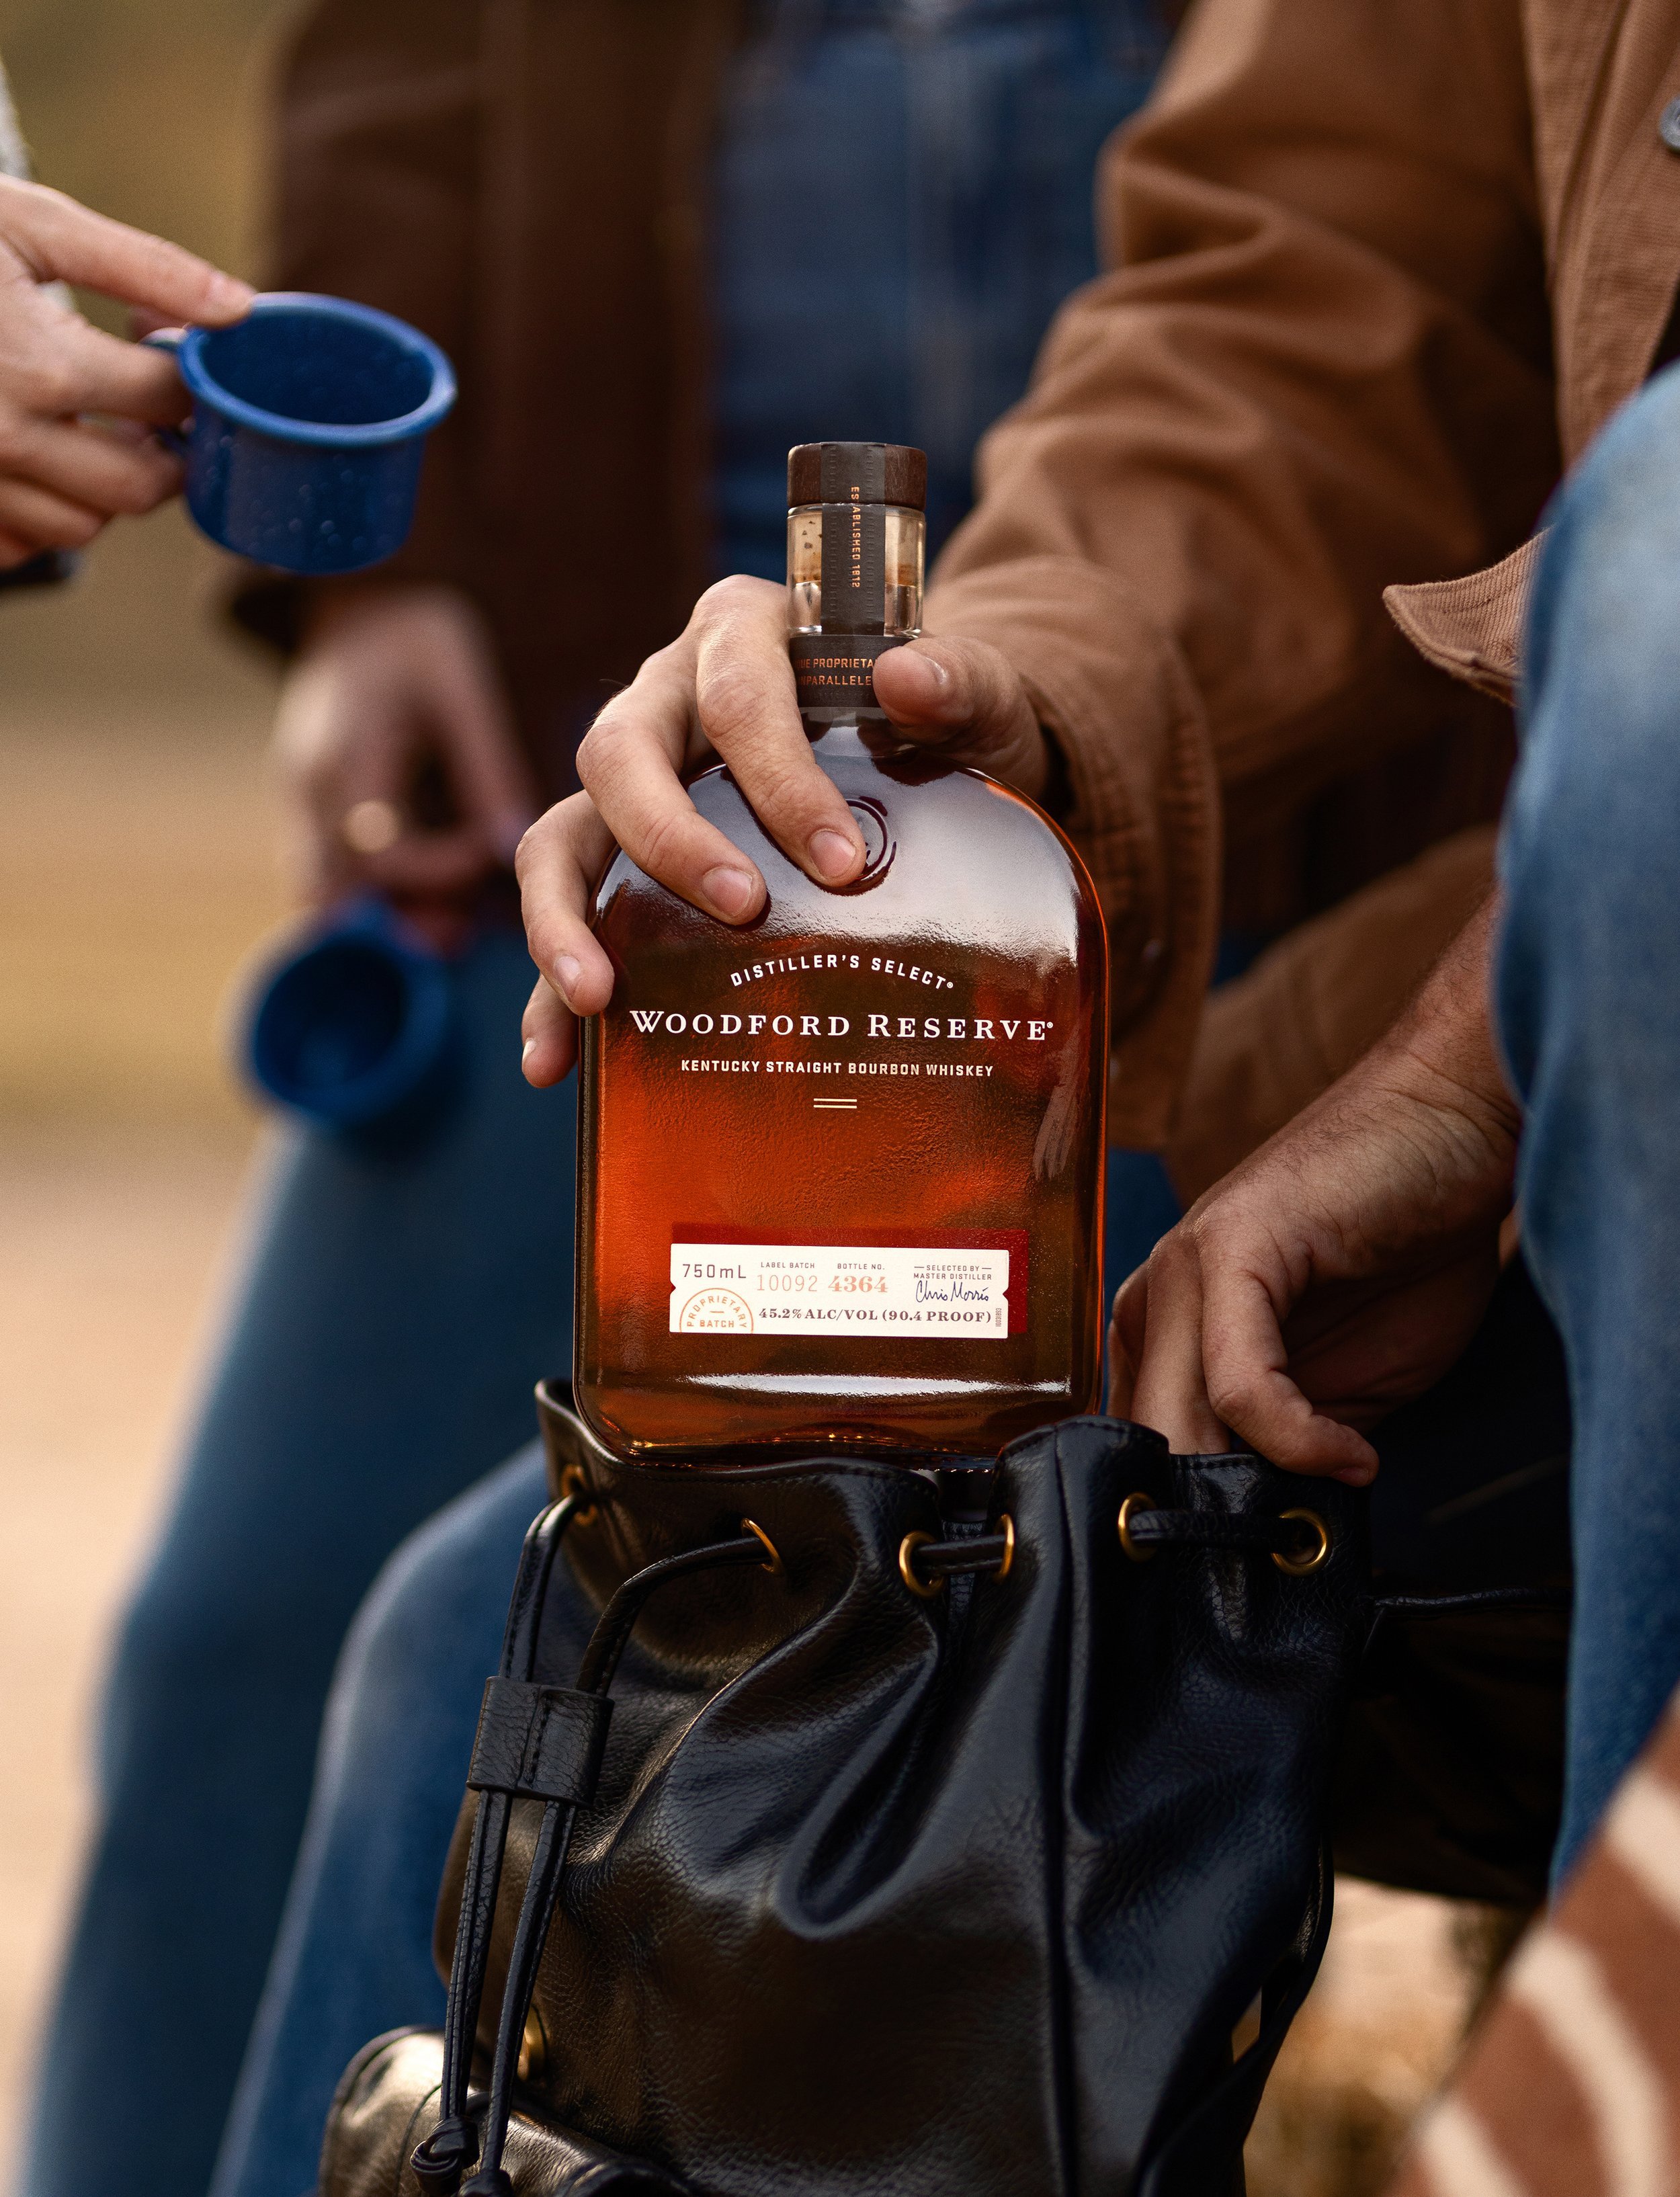 @amy schromm photography Woodford Reserve 6.jpg